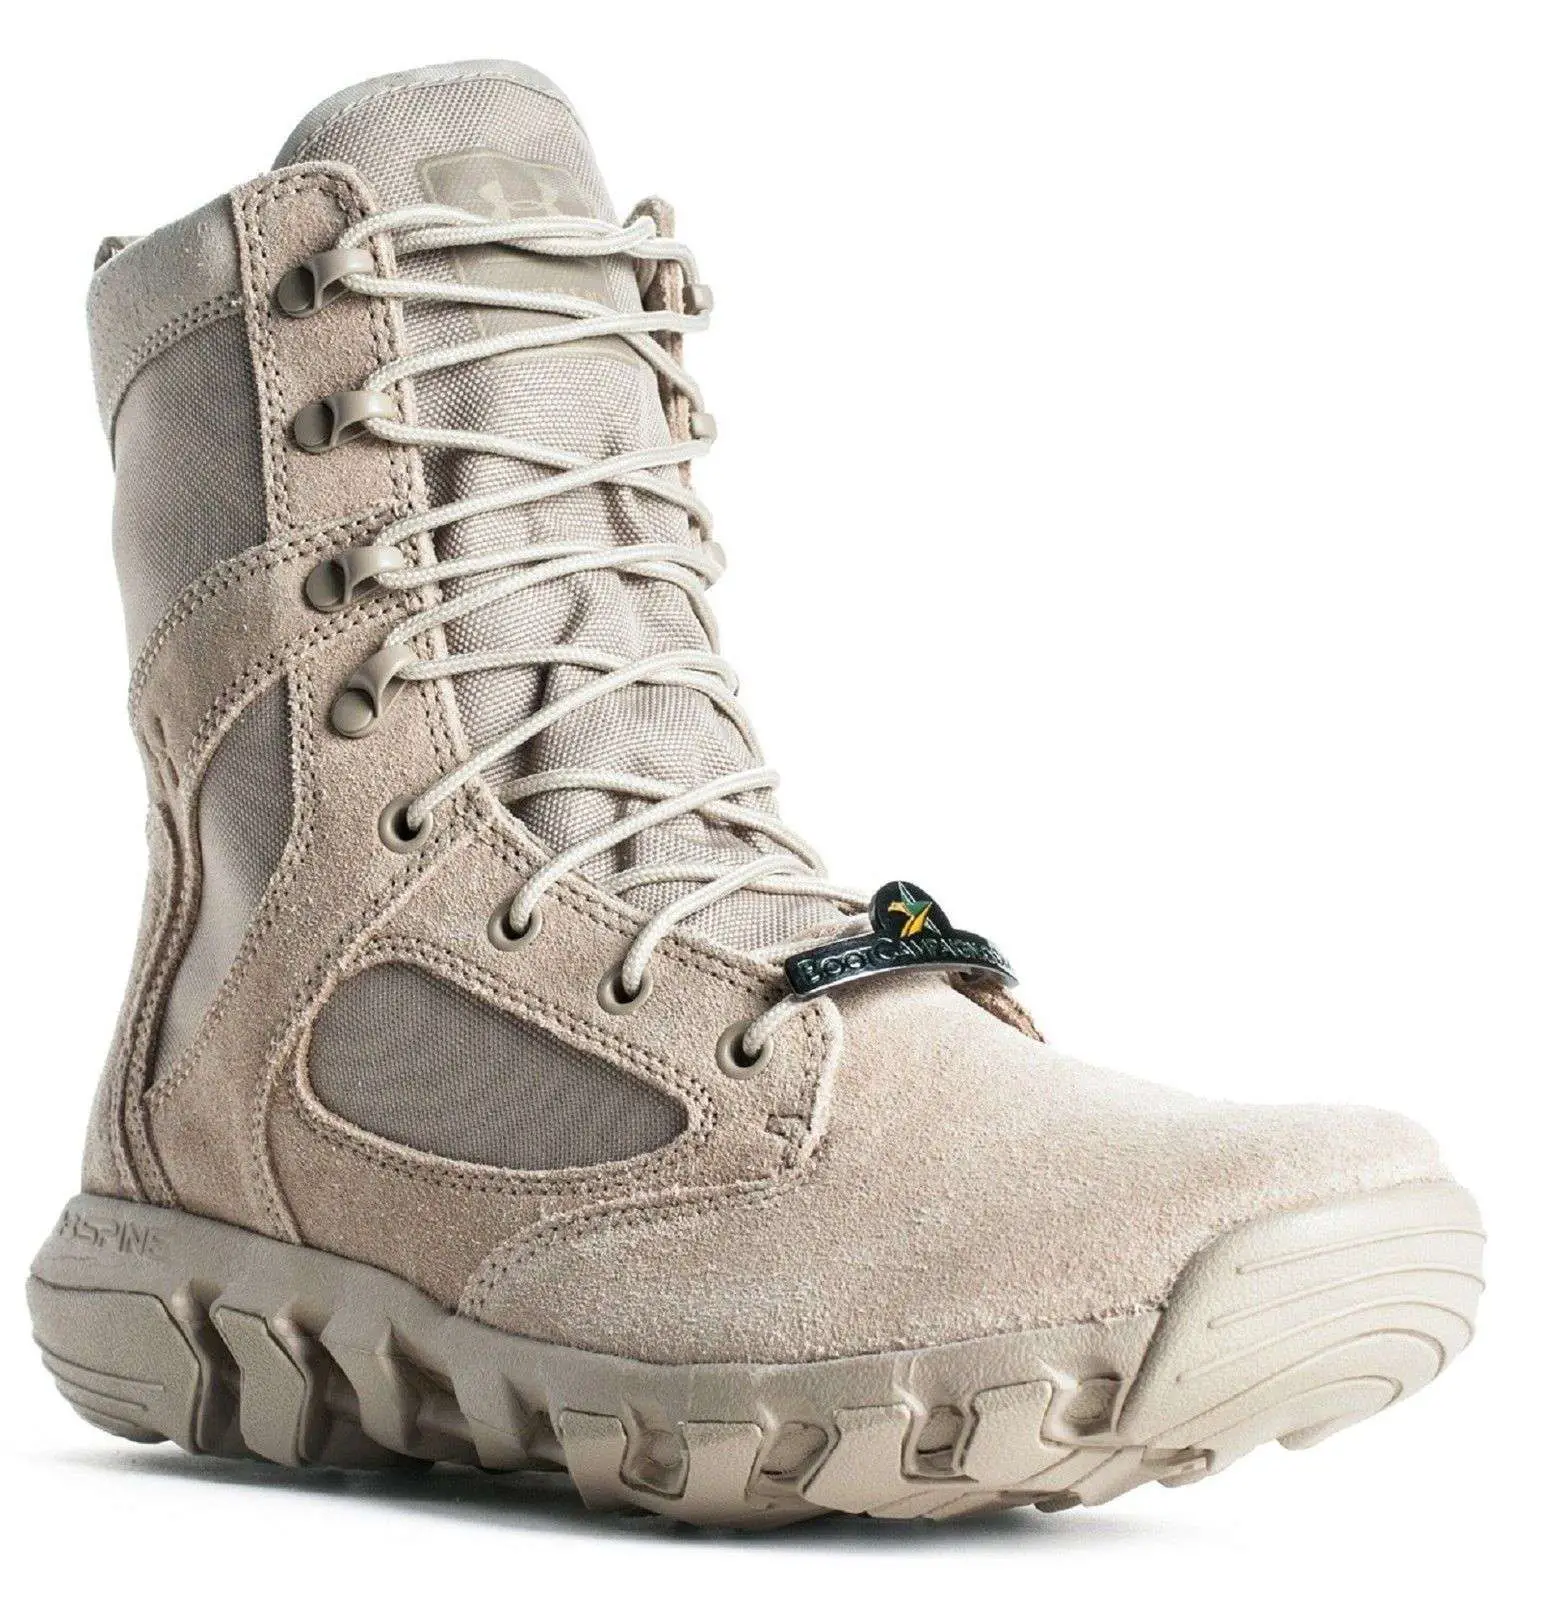 Under Armour Alegent Tactical Duty Boots